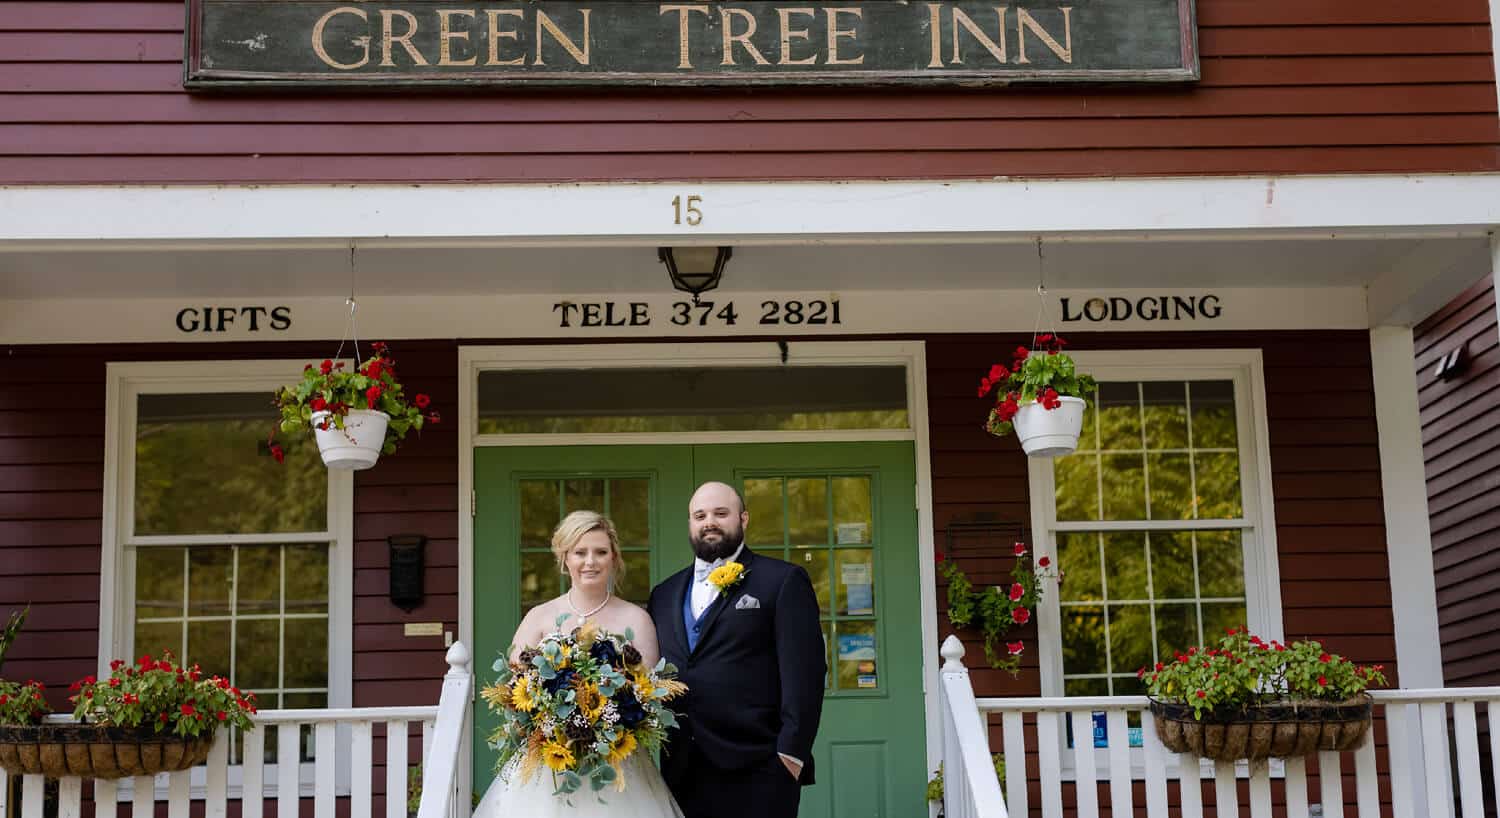 Bride and groom standing on stairs leading onto porch with green sign with text Green Tree Inn hanging on red sided building.